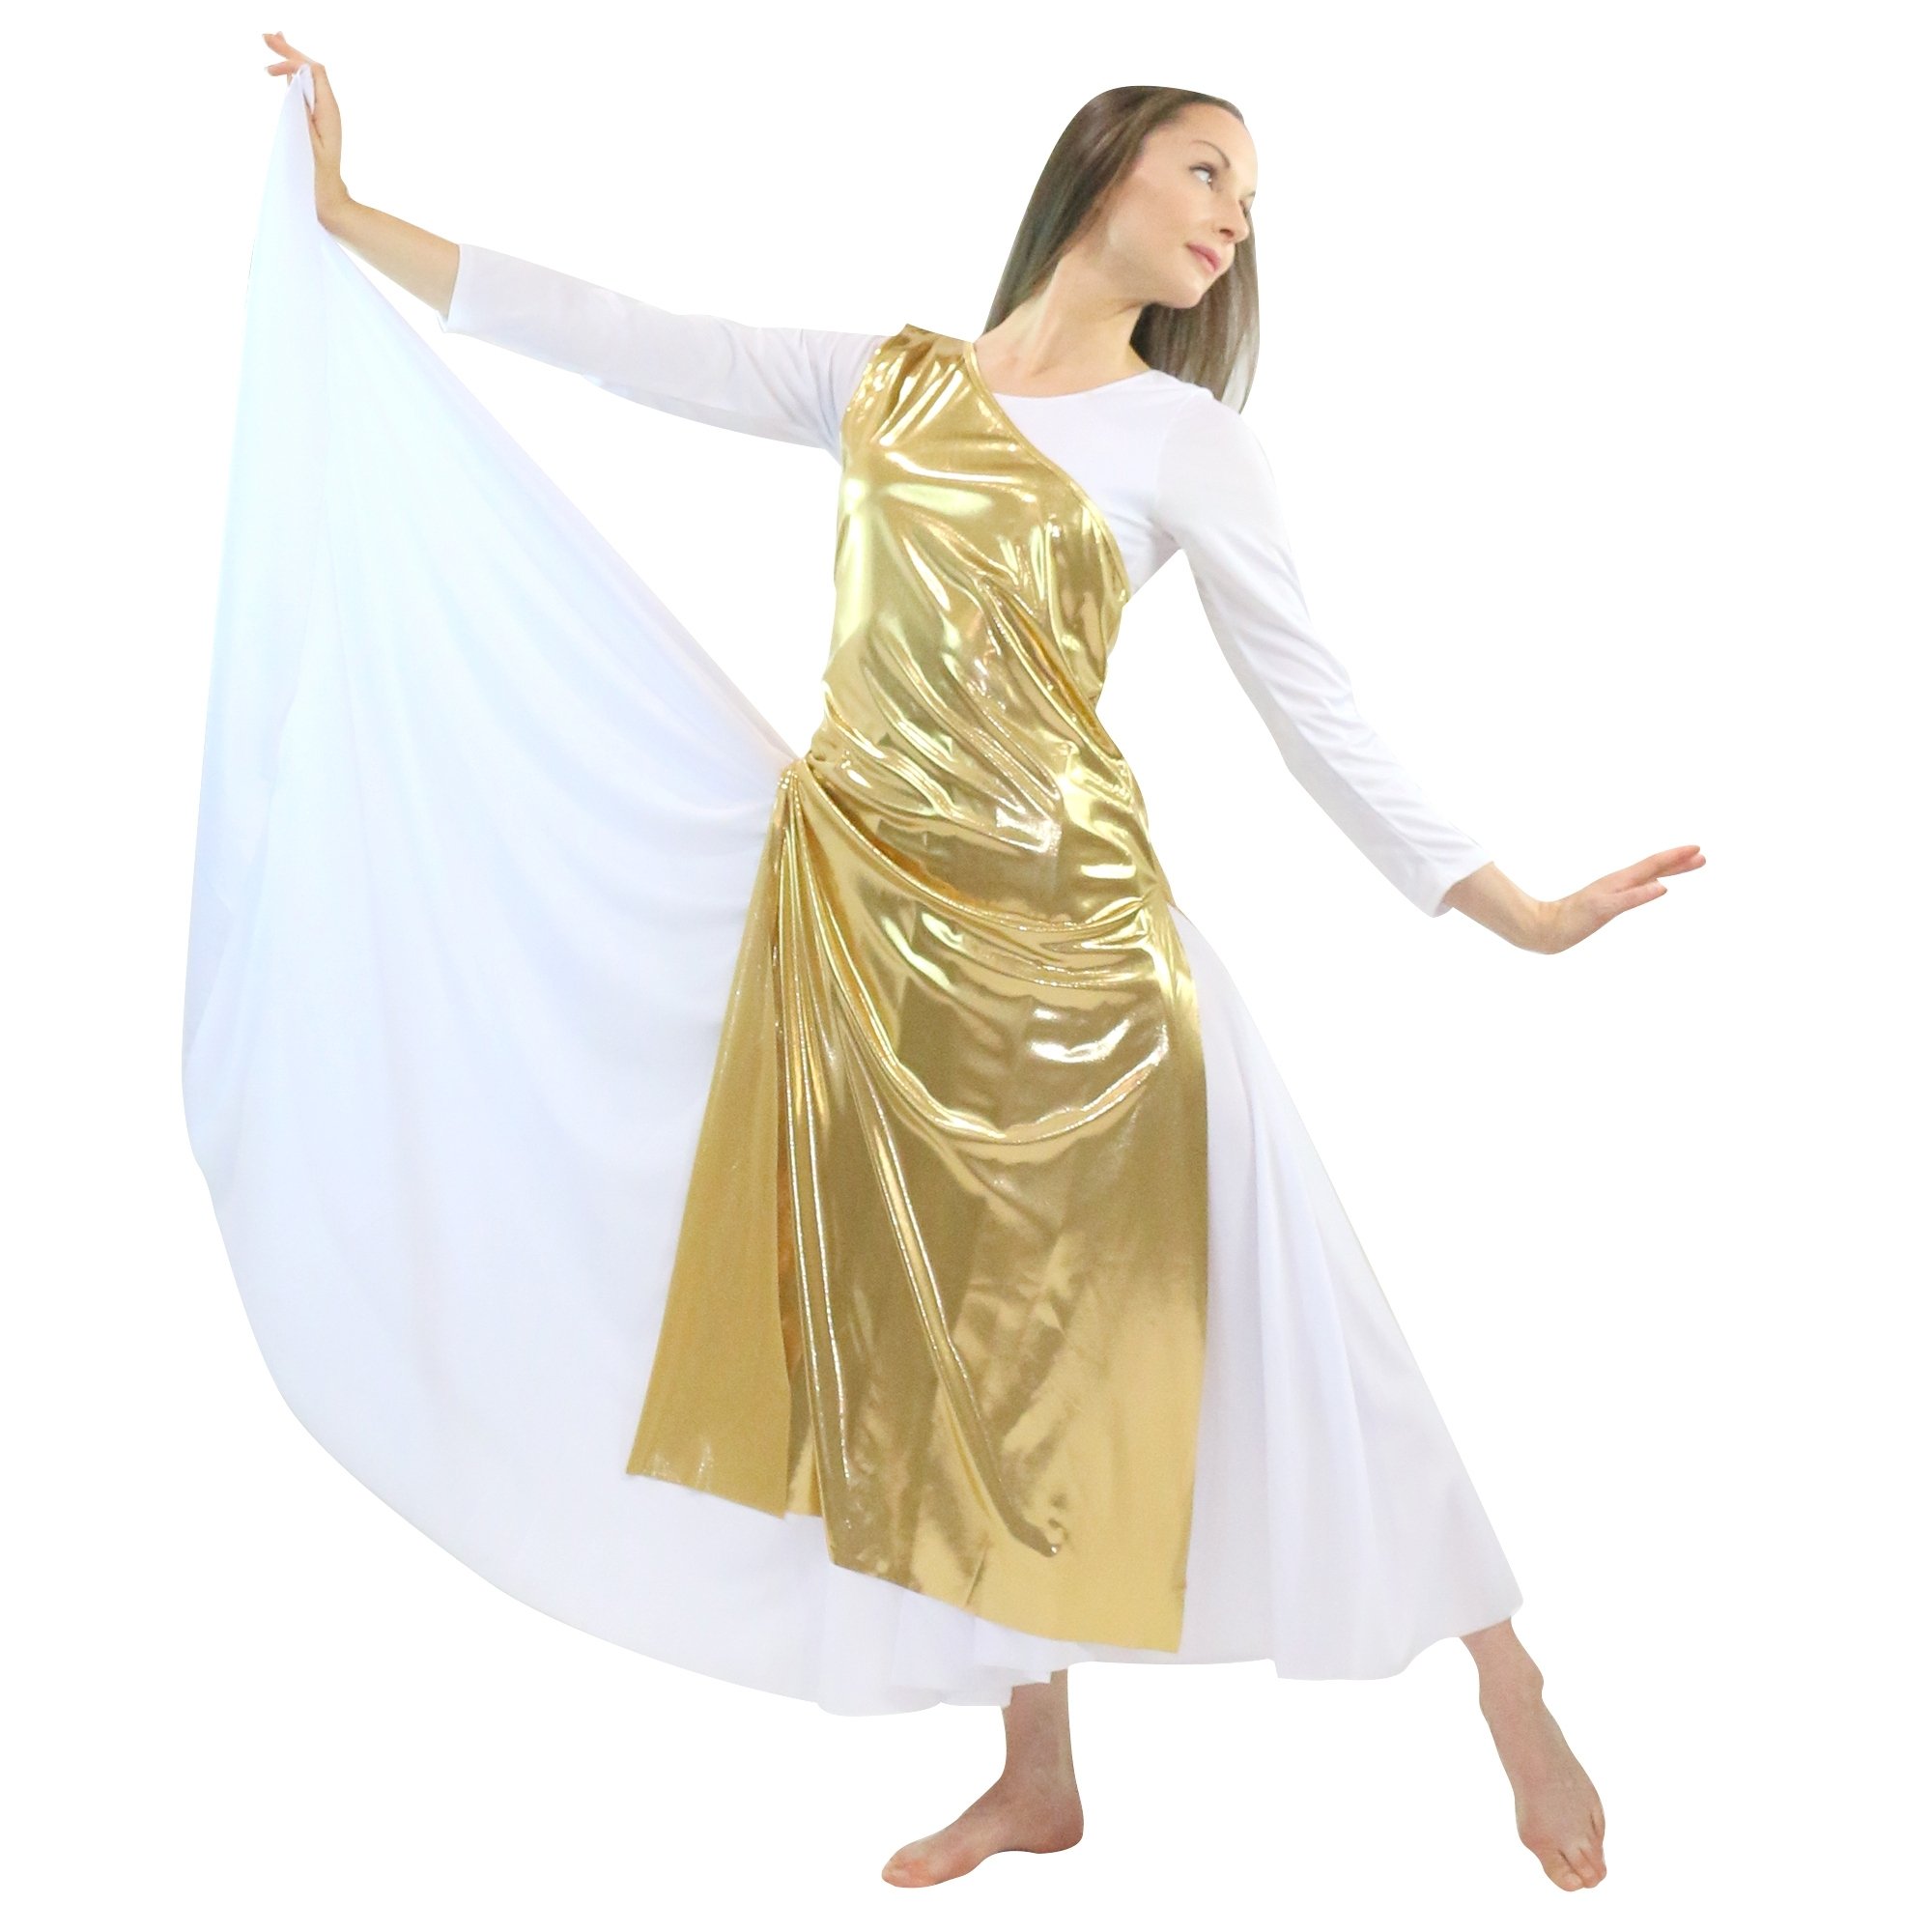 Danzcue Worship Dance Tunic with Side Slits(white dress not included)